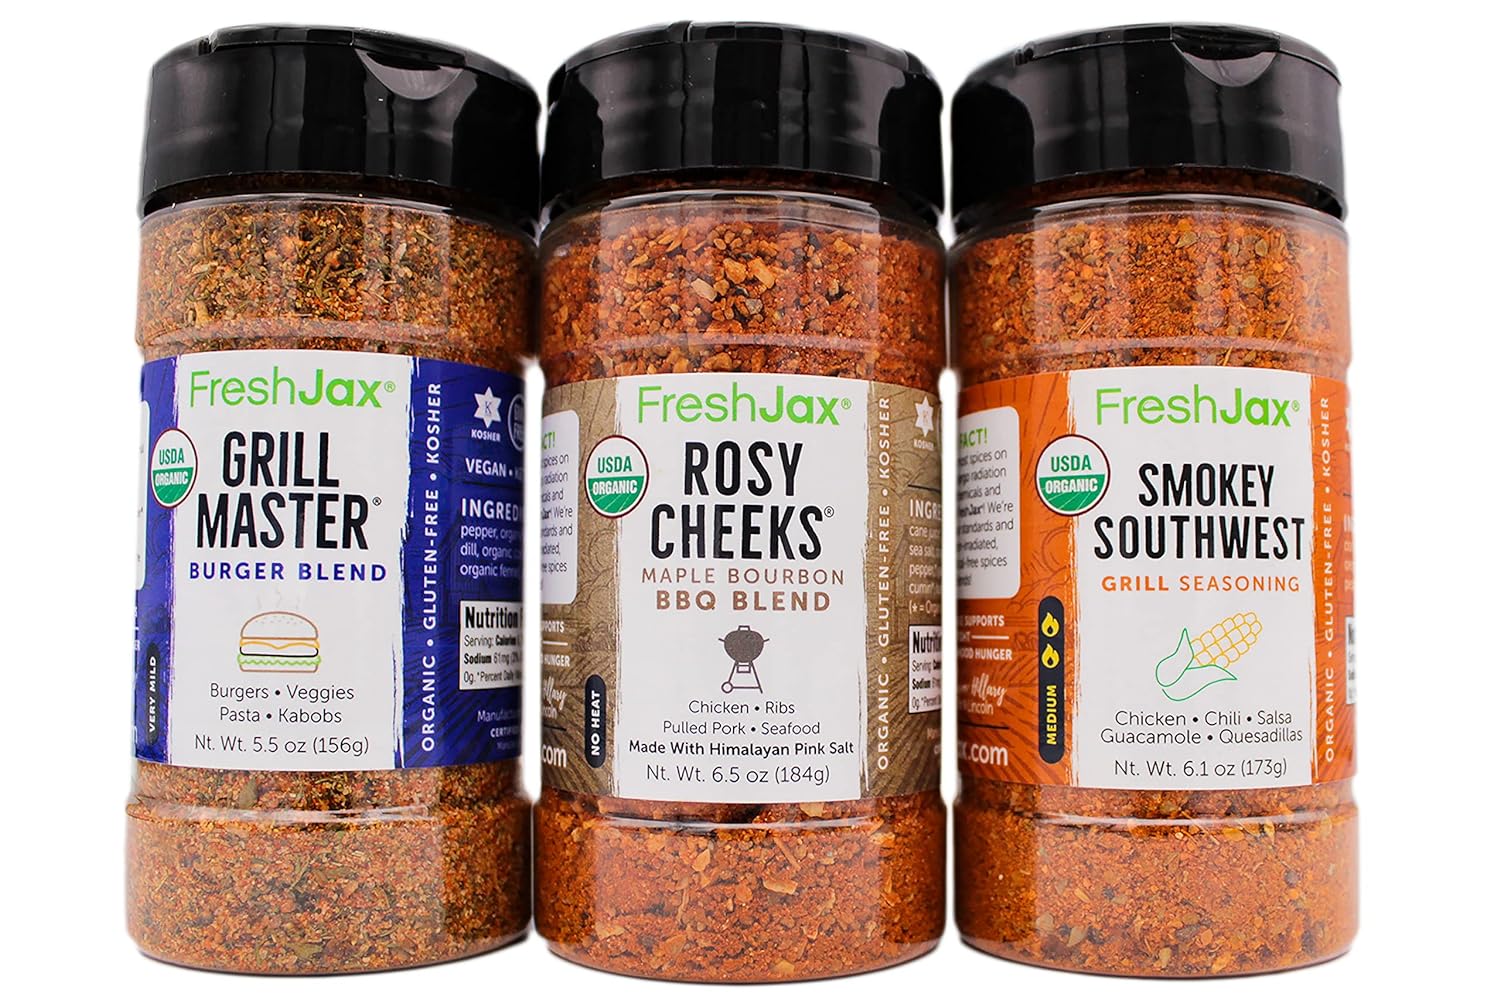 FreshJax Organic Steak Meat Seasoning Gift Set | 3 Large Bottles | Grill Master, Rosy Cheeks Rub, Smokey Southwest Grill Seasoning | Handcrafted in Jacksonville | Grilling Spice Gift Set (3 pack) - Gift Box Included